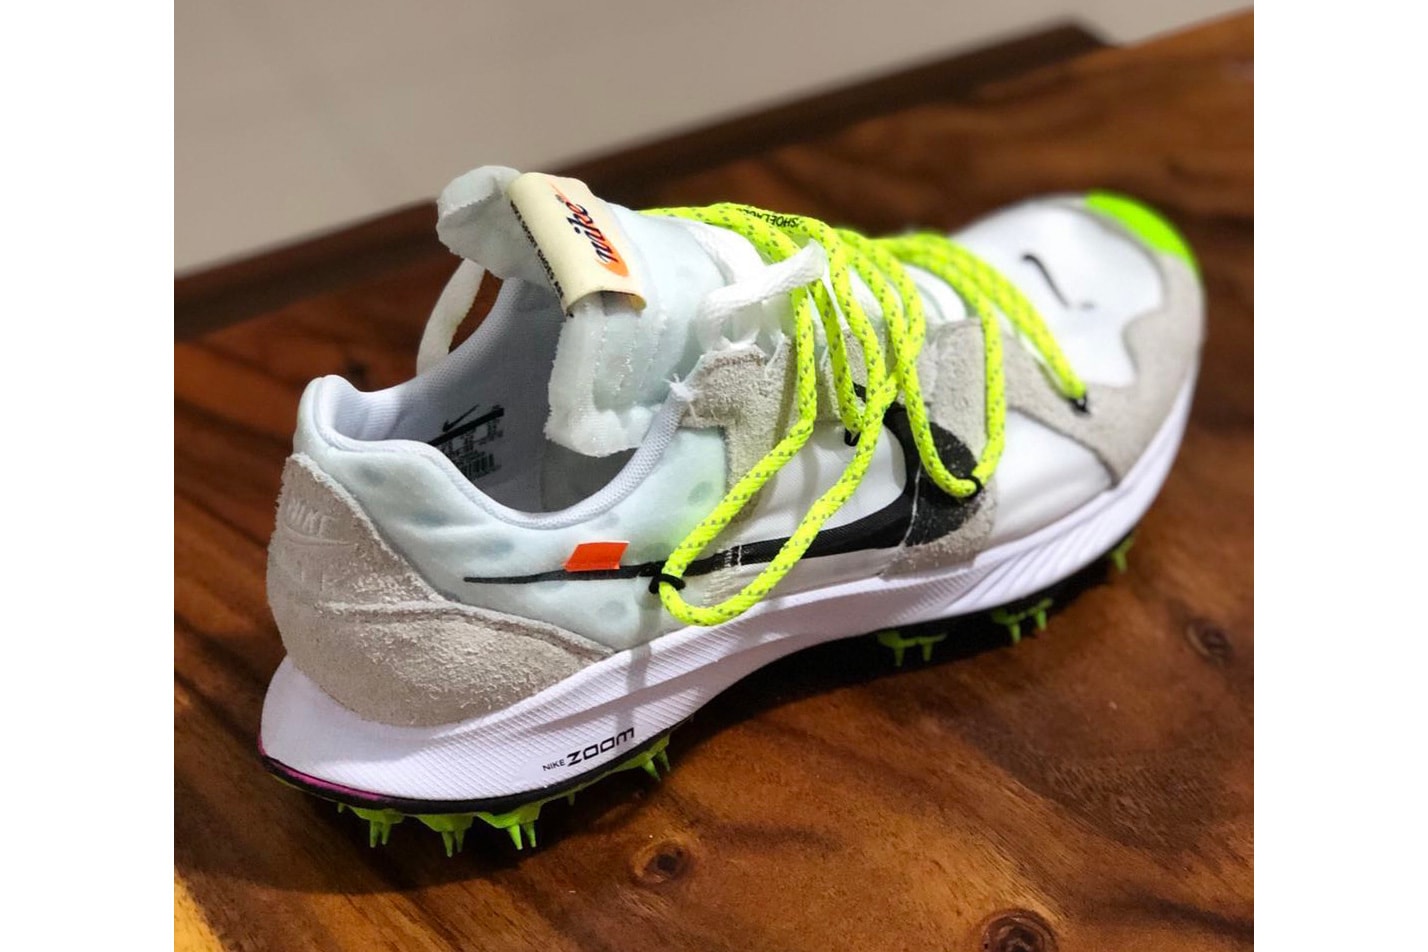 Sneakers by Virgil Abloh Beating Auction Estimates